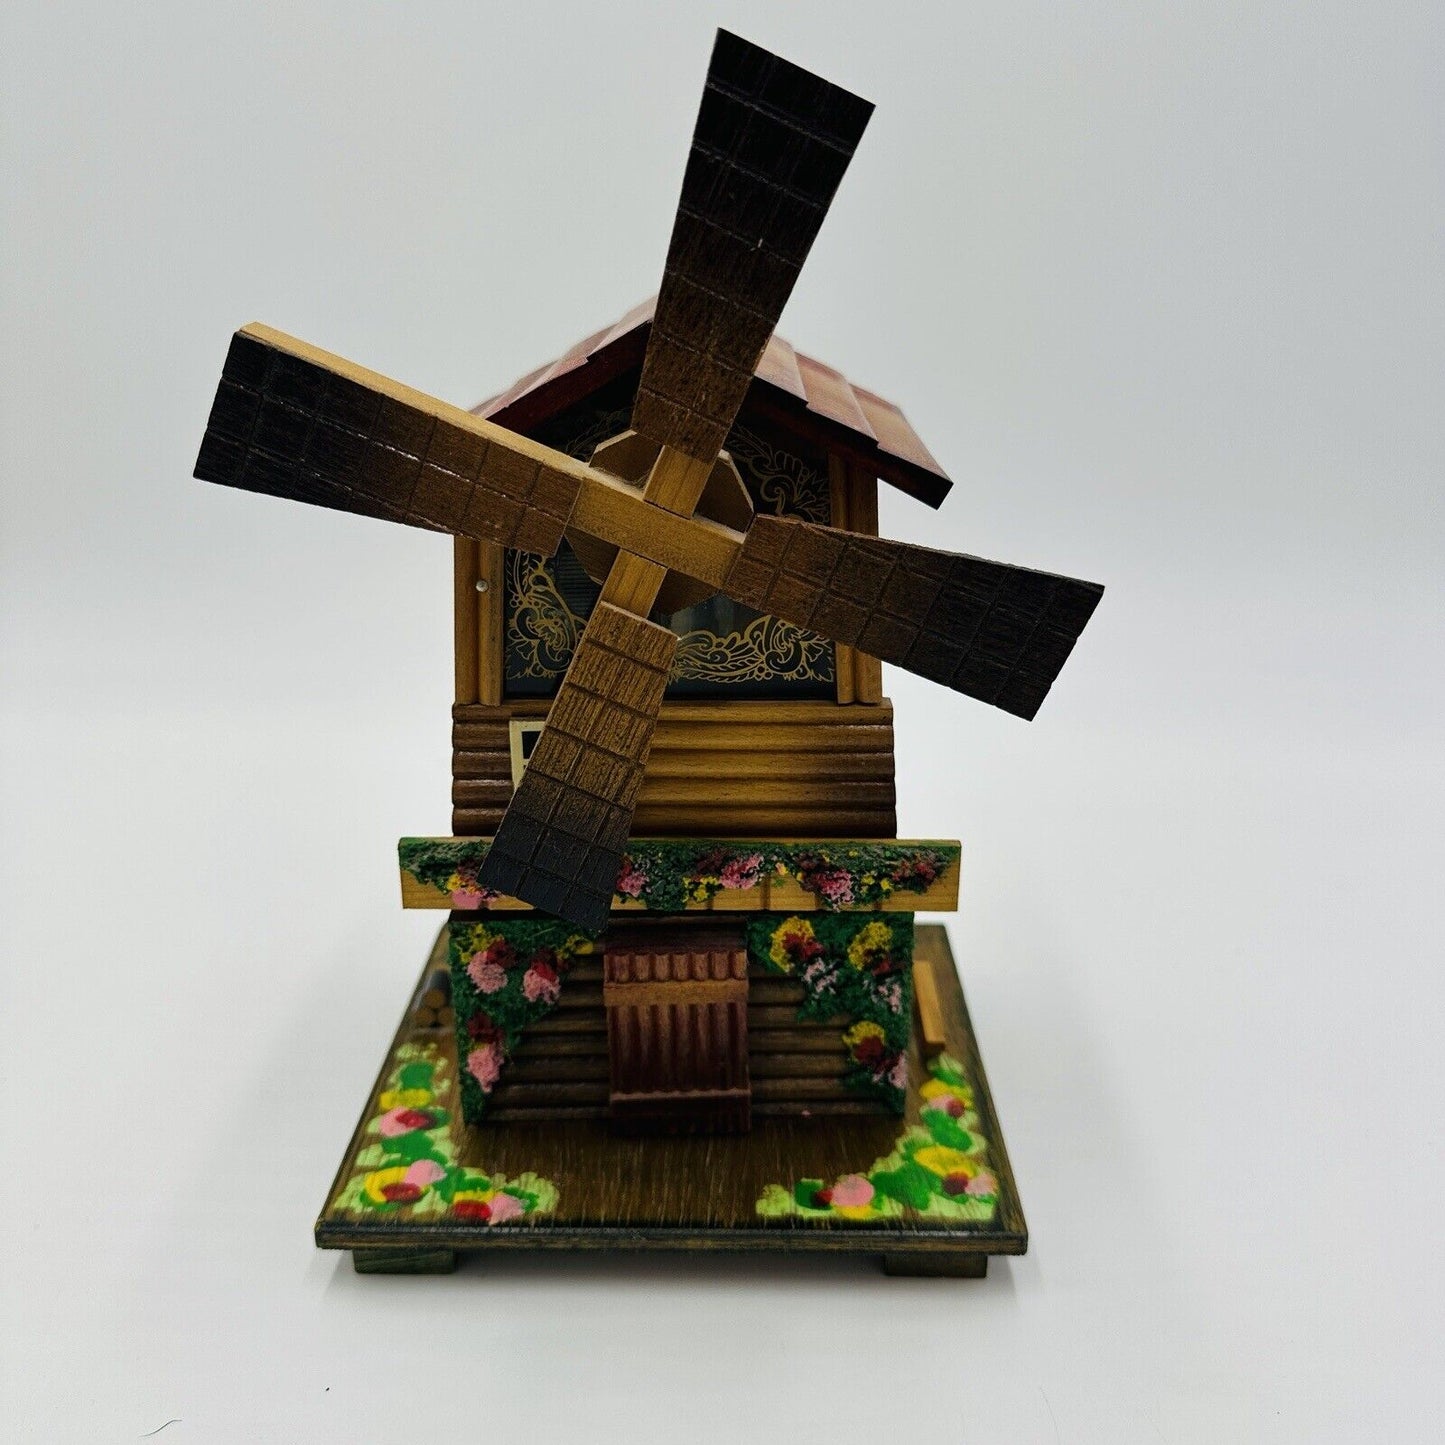 Wooden Jewelry Wood Box Windmill Shaped Dutch Vintage Hand-painted Home Decor